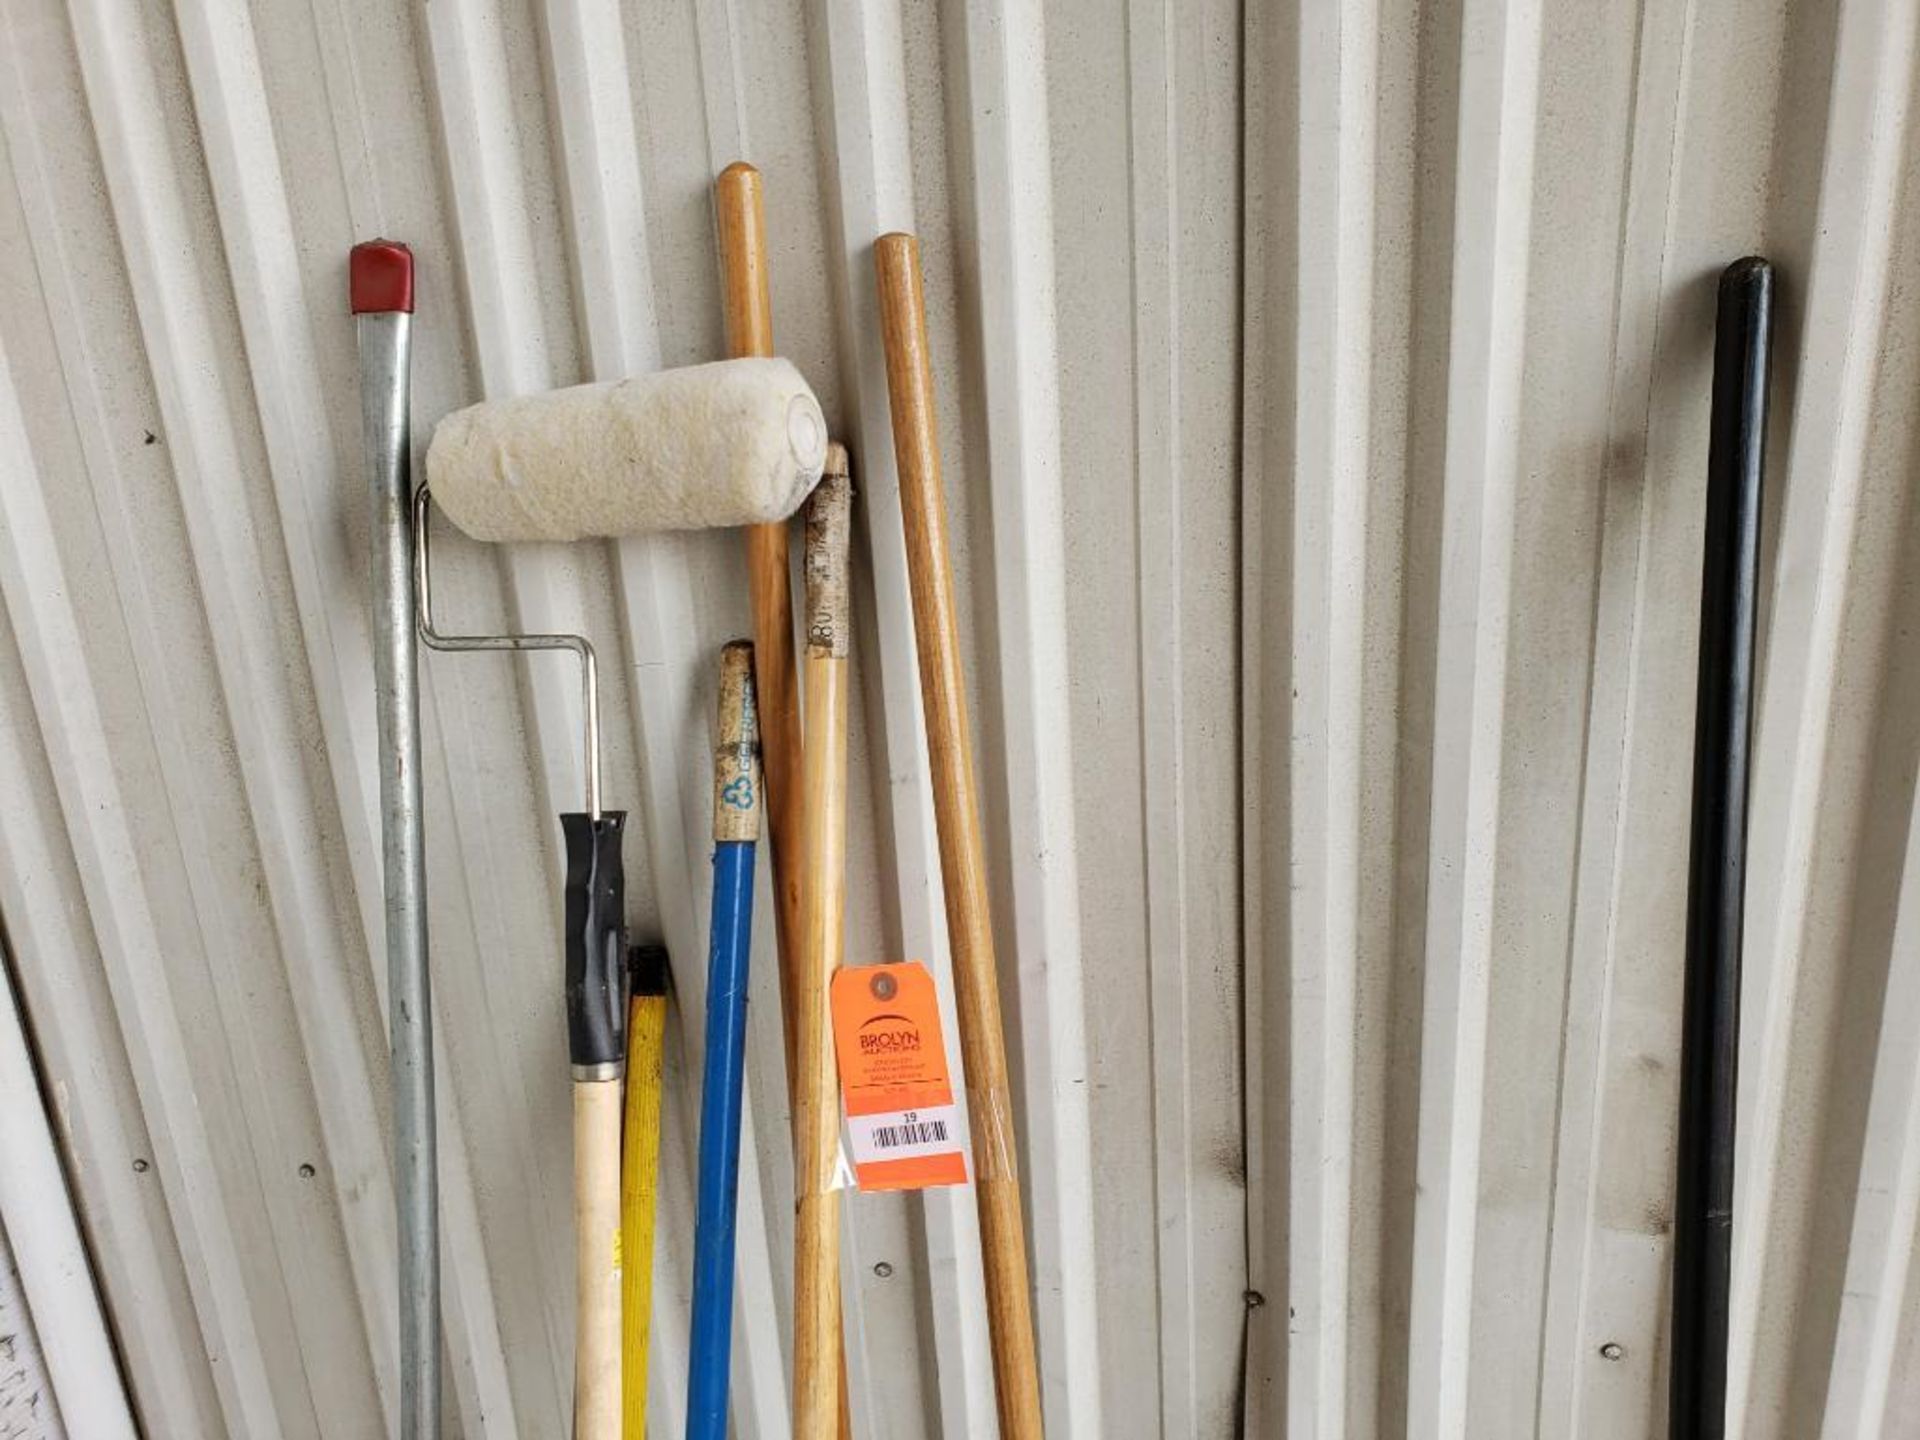 Assorted shop cleaning tools. - Image 3 of 3